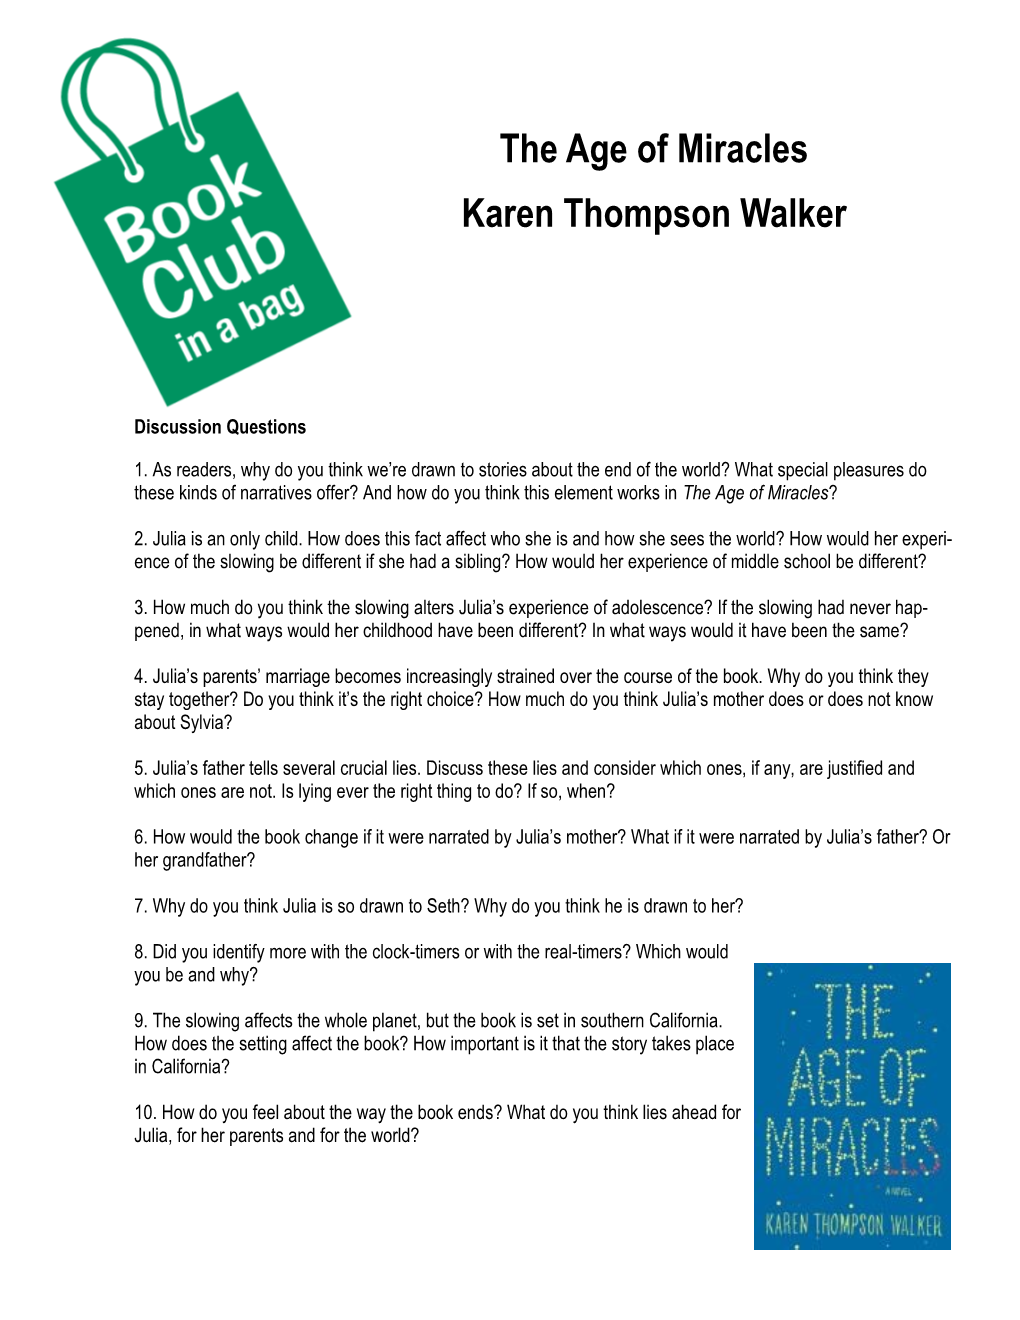 The Age of Miracles Karen Thompson Walker